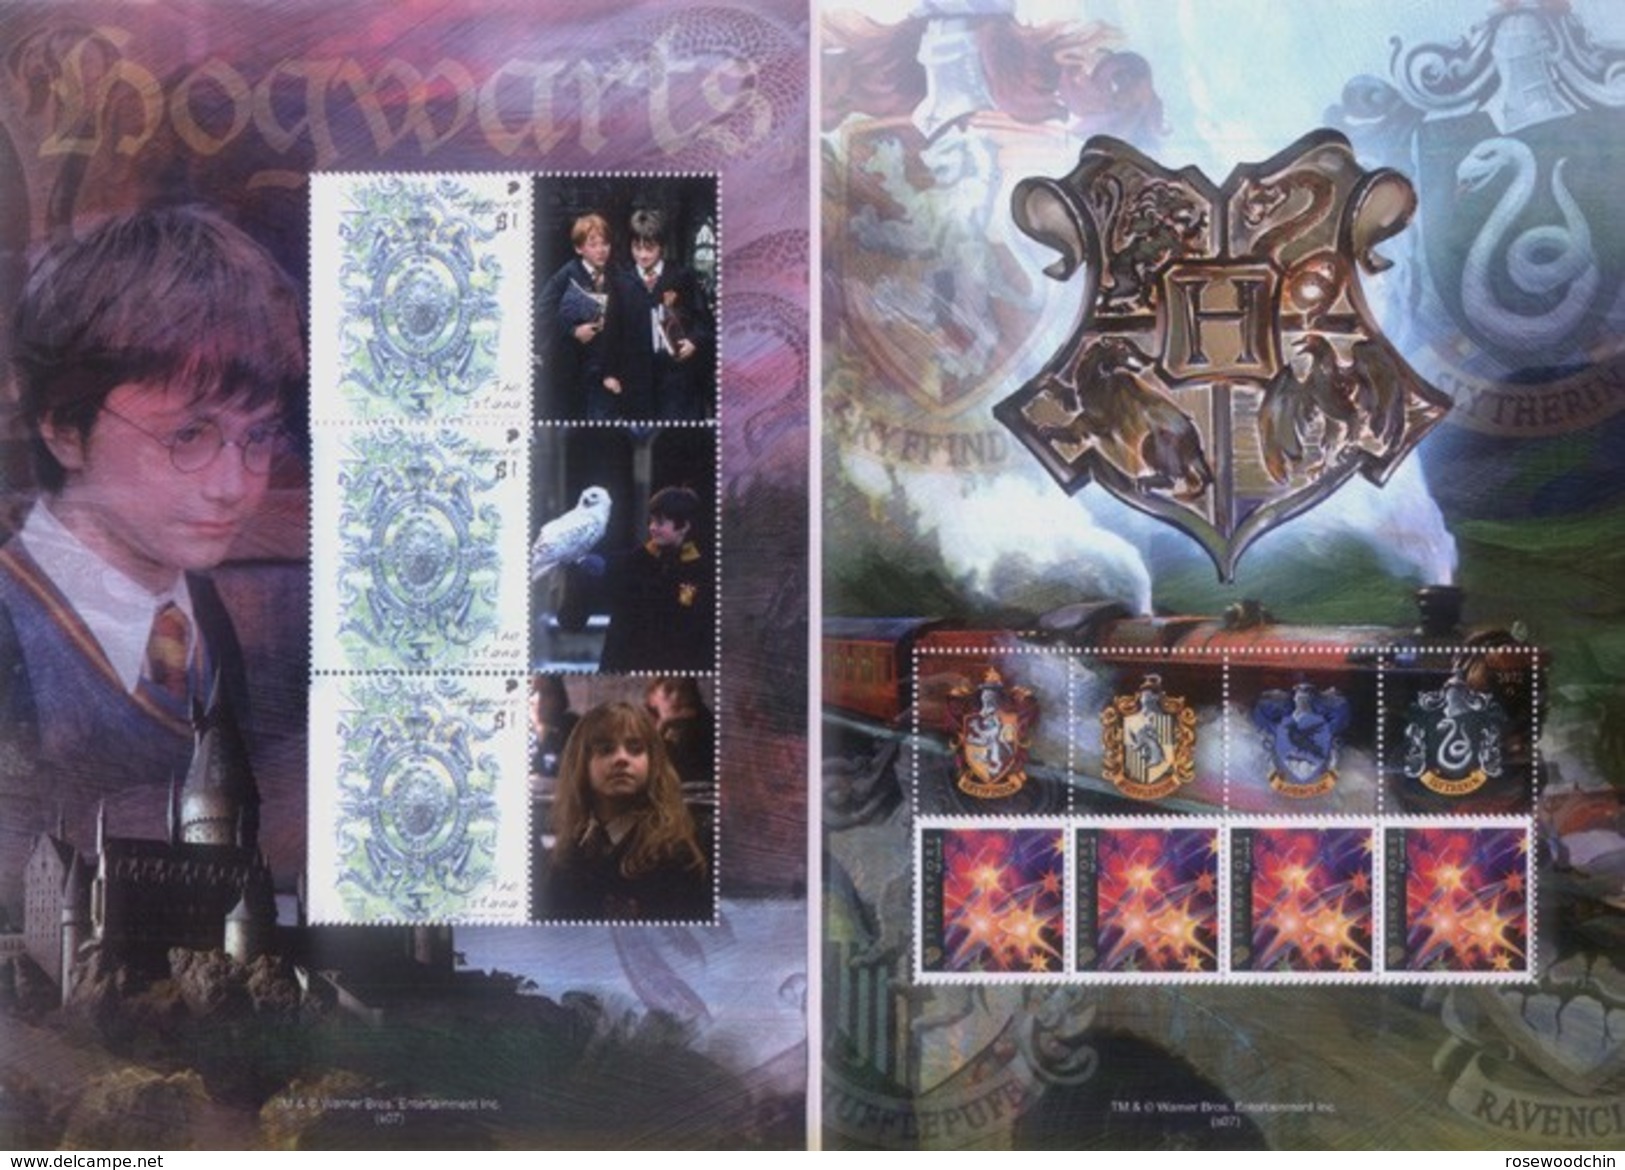 LIMITED EDITION !!   Singapore Complete box set 10 Harry Potter Stamps Collection Movie 1- 5